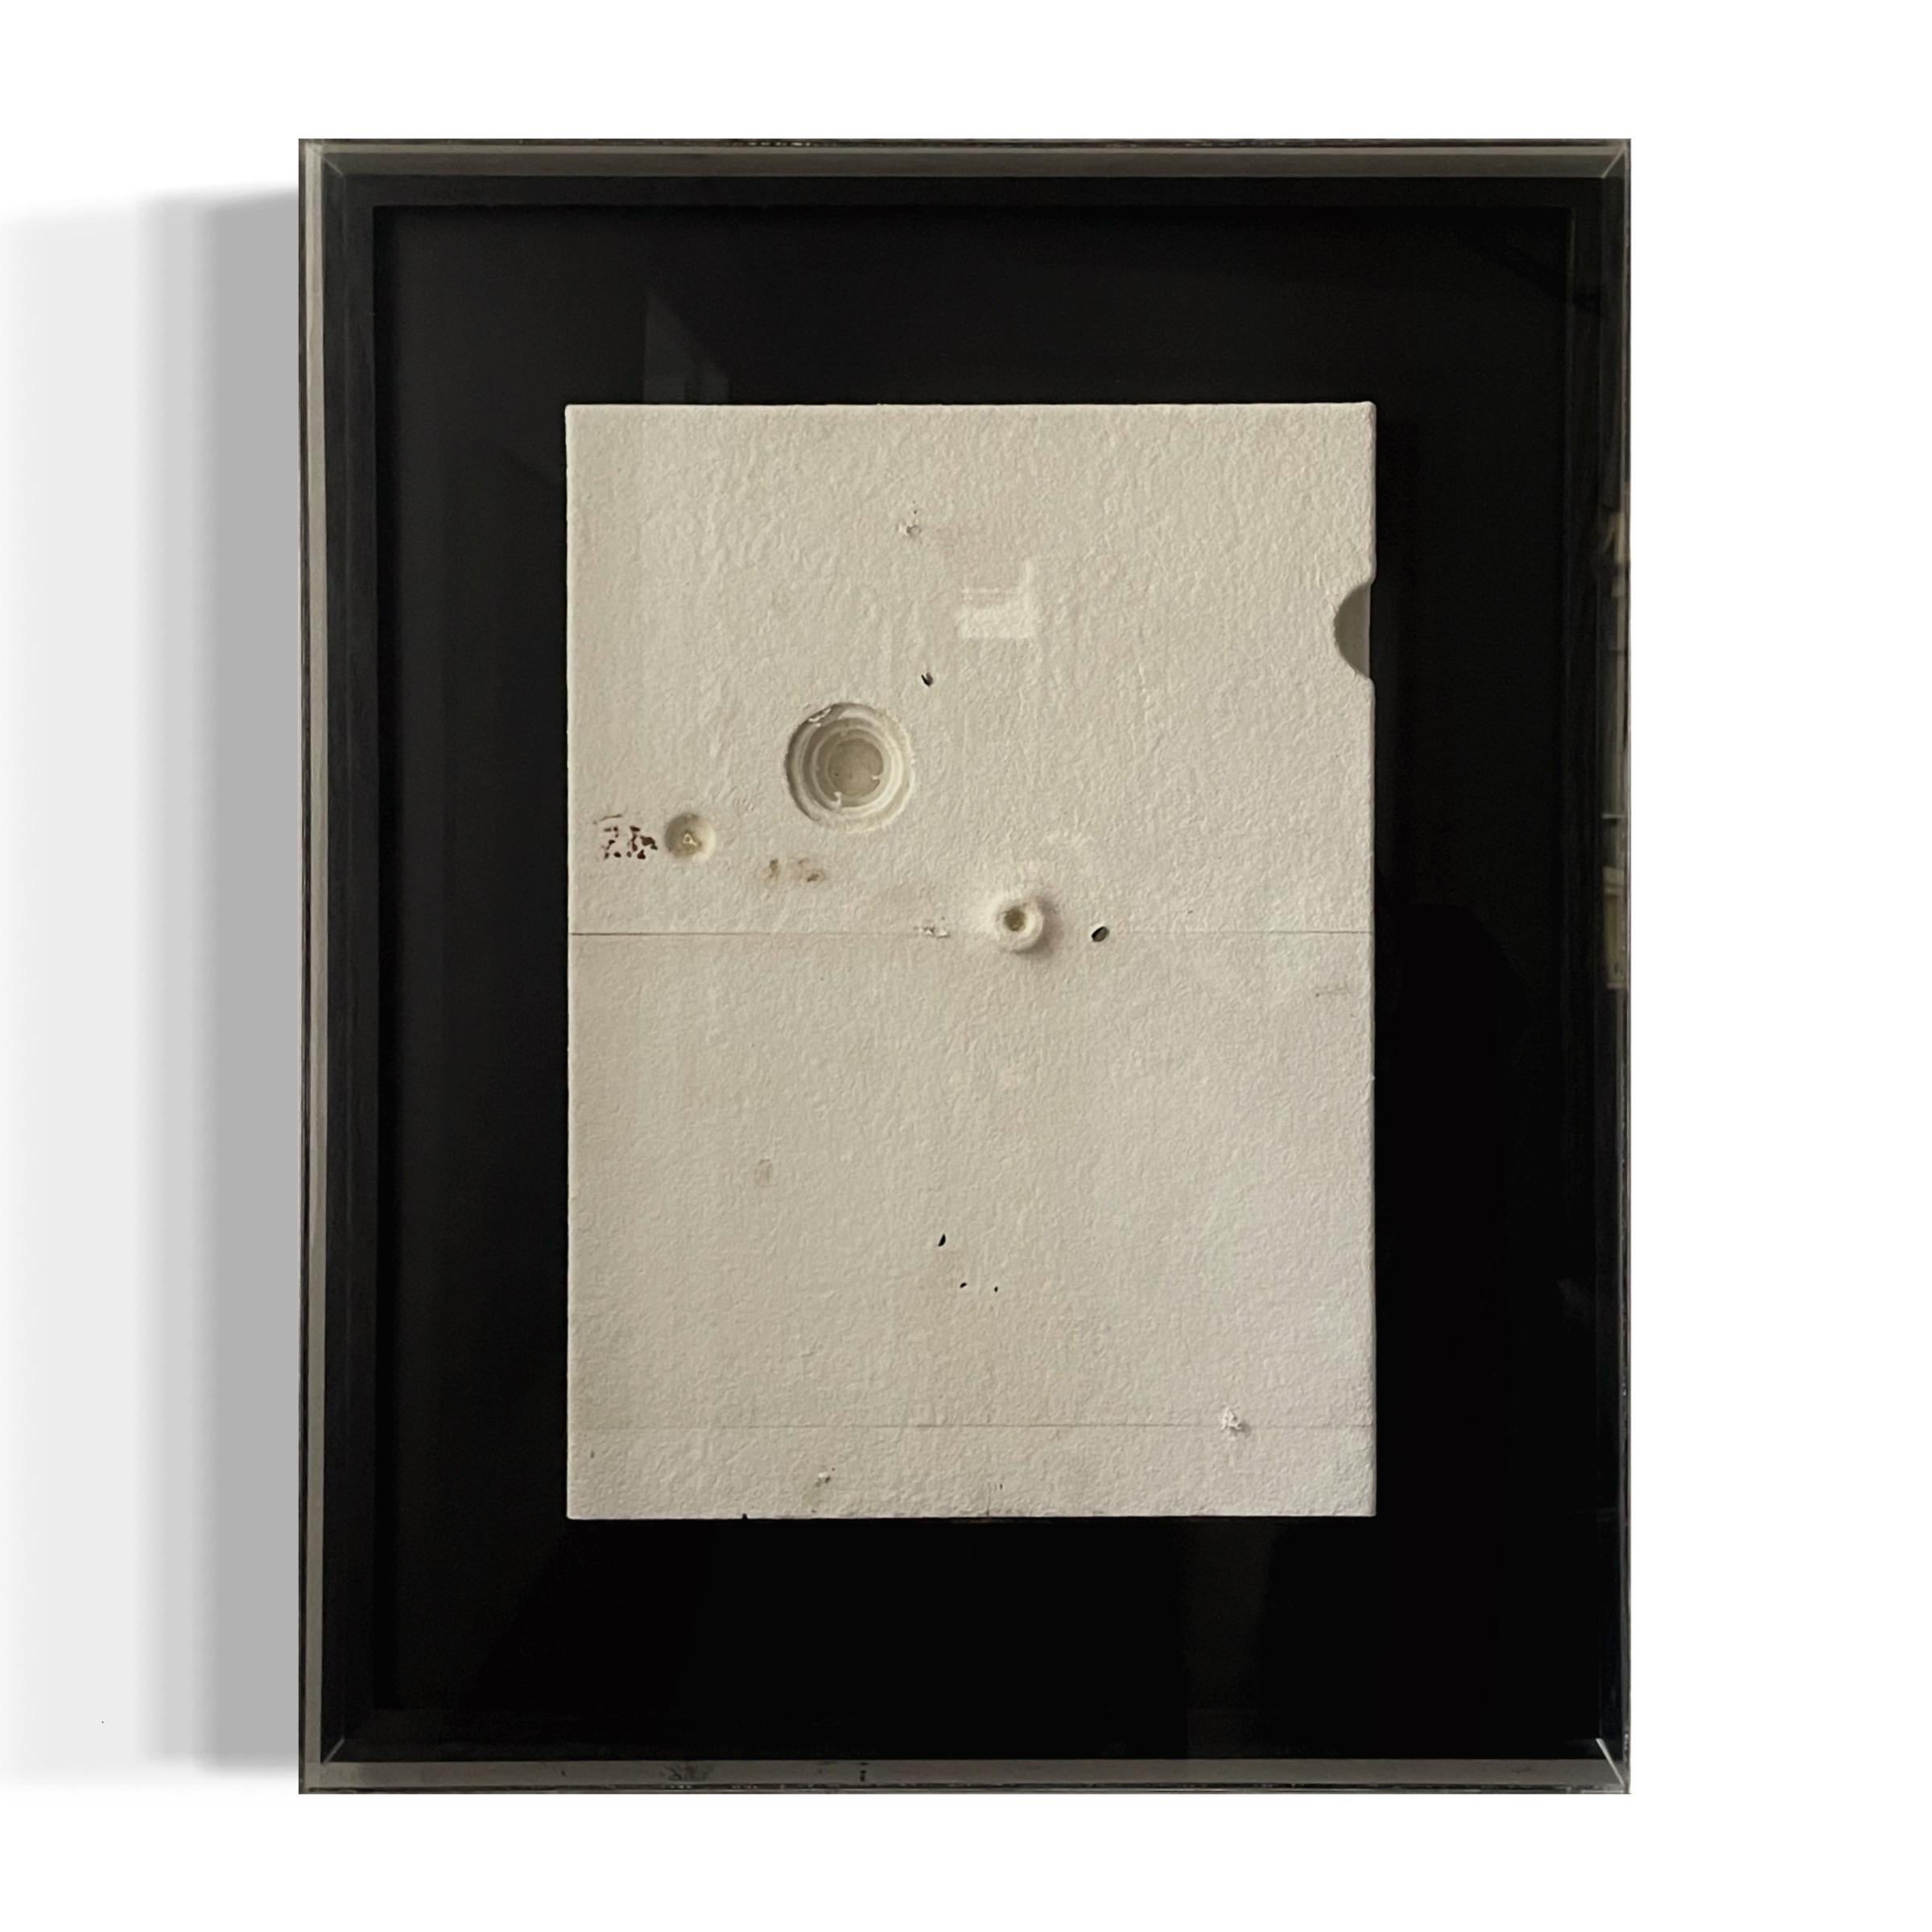 The refined and ingenious artistic search of the Spaniard Jorge Usán, born in 1979, masterfully presented as a material anthology of sulphurous abstractions strictly free of artifice, composed of carved wood covered with fibers, acrylic and mixed